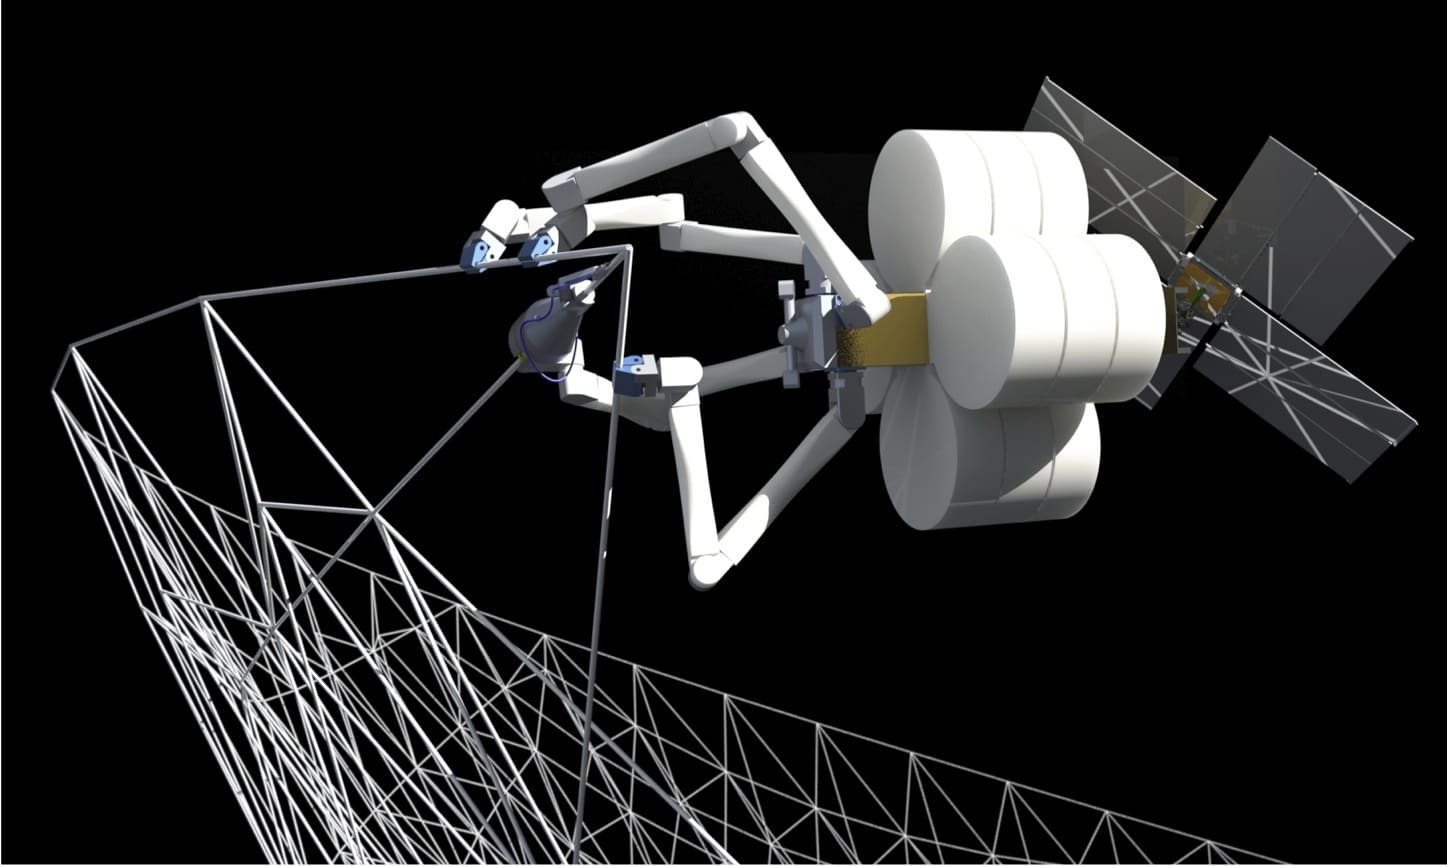 NASA To Use 3D Printer To Print Objects In Space | Bit Rebels
